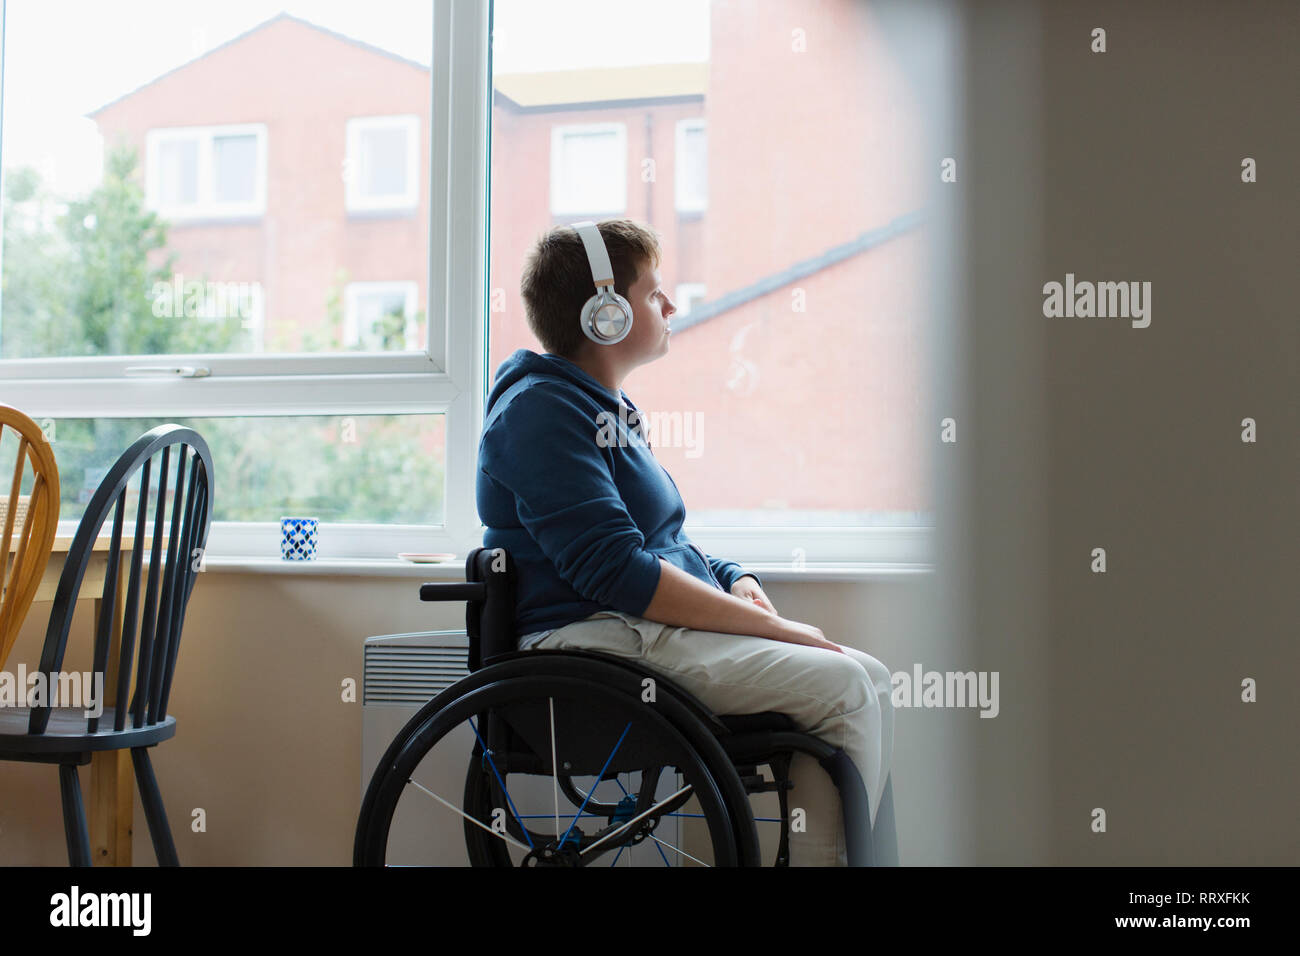 Thoughtful young woman in wheelchair listening to music with headphones at window Stock Photo